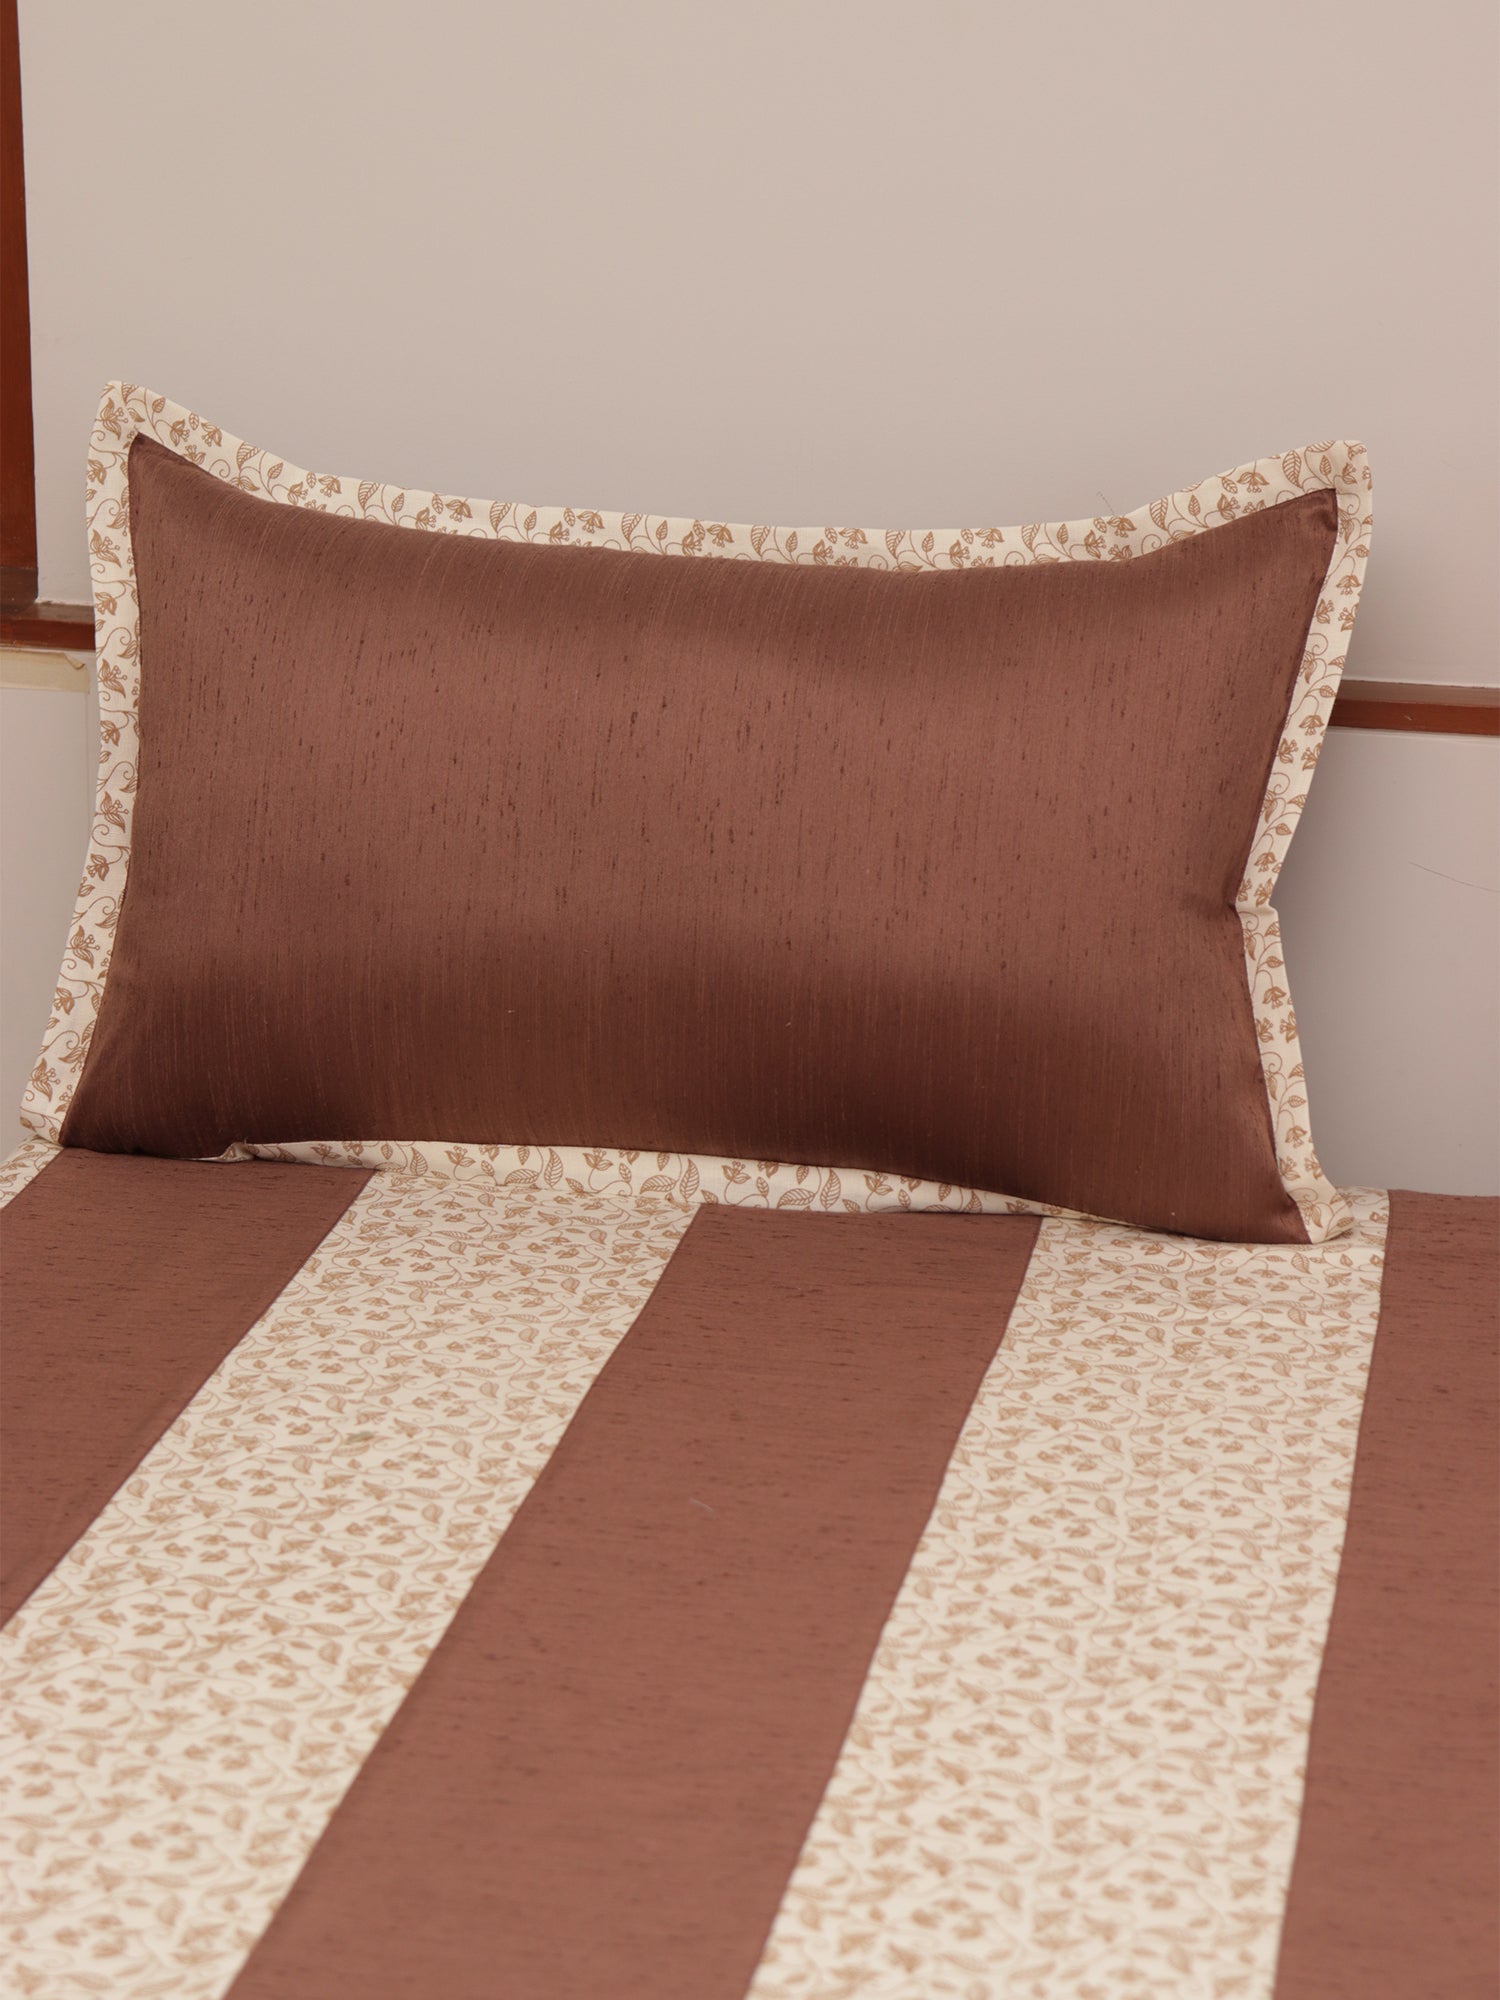 brown colored floral printed bed cover with 2 matching pillow covers made from cotton blend for queen size double bed 90x108 inch